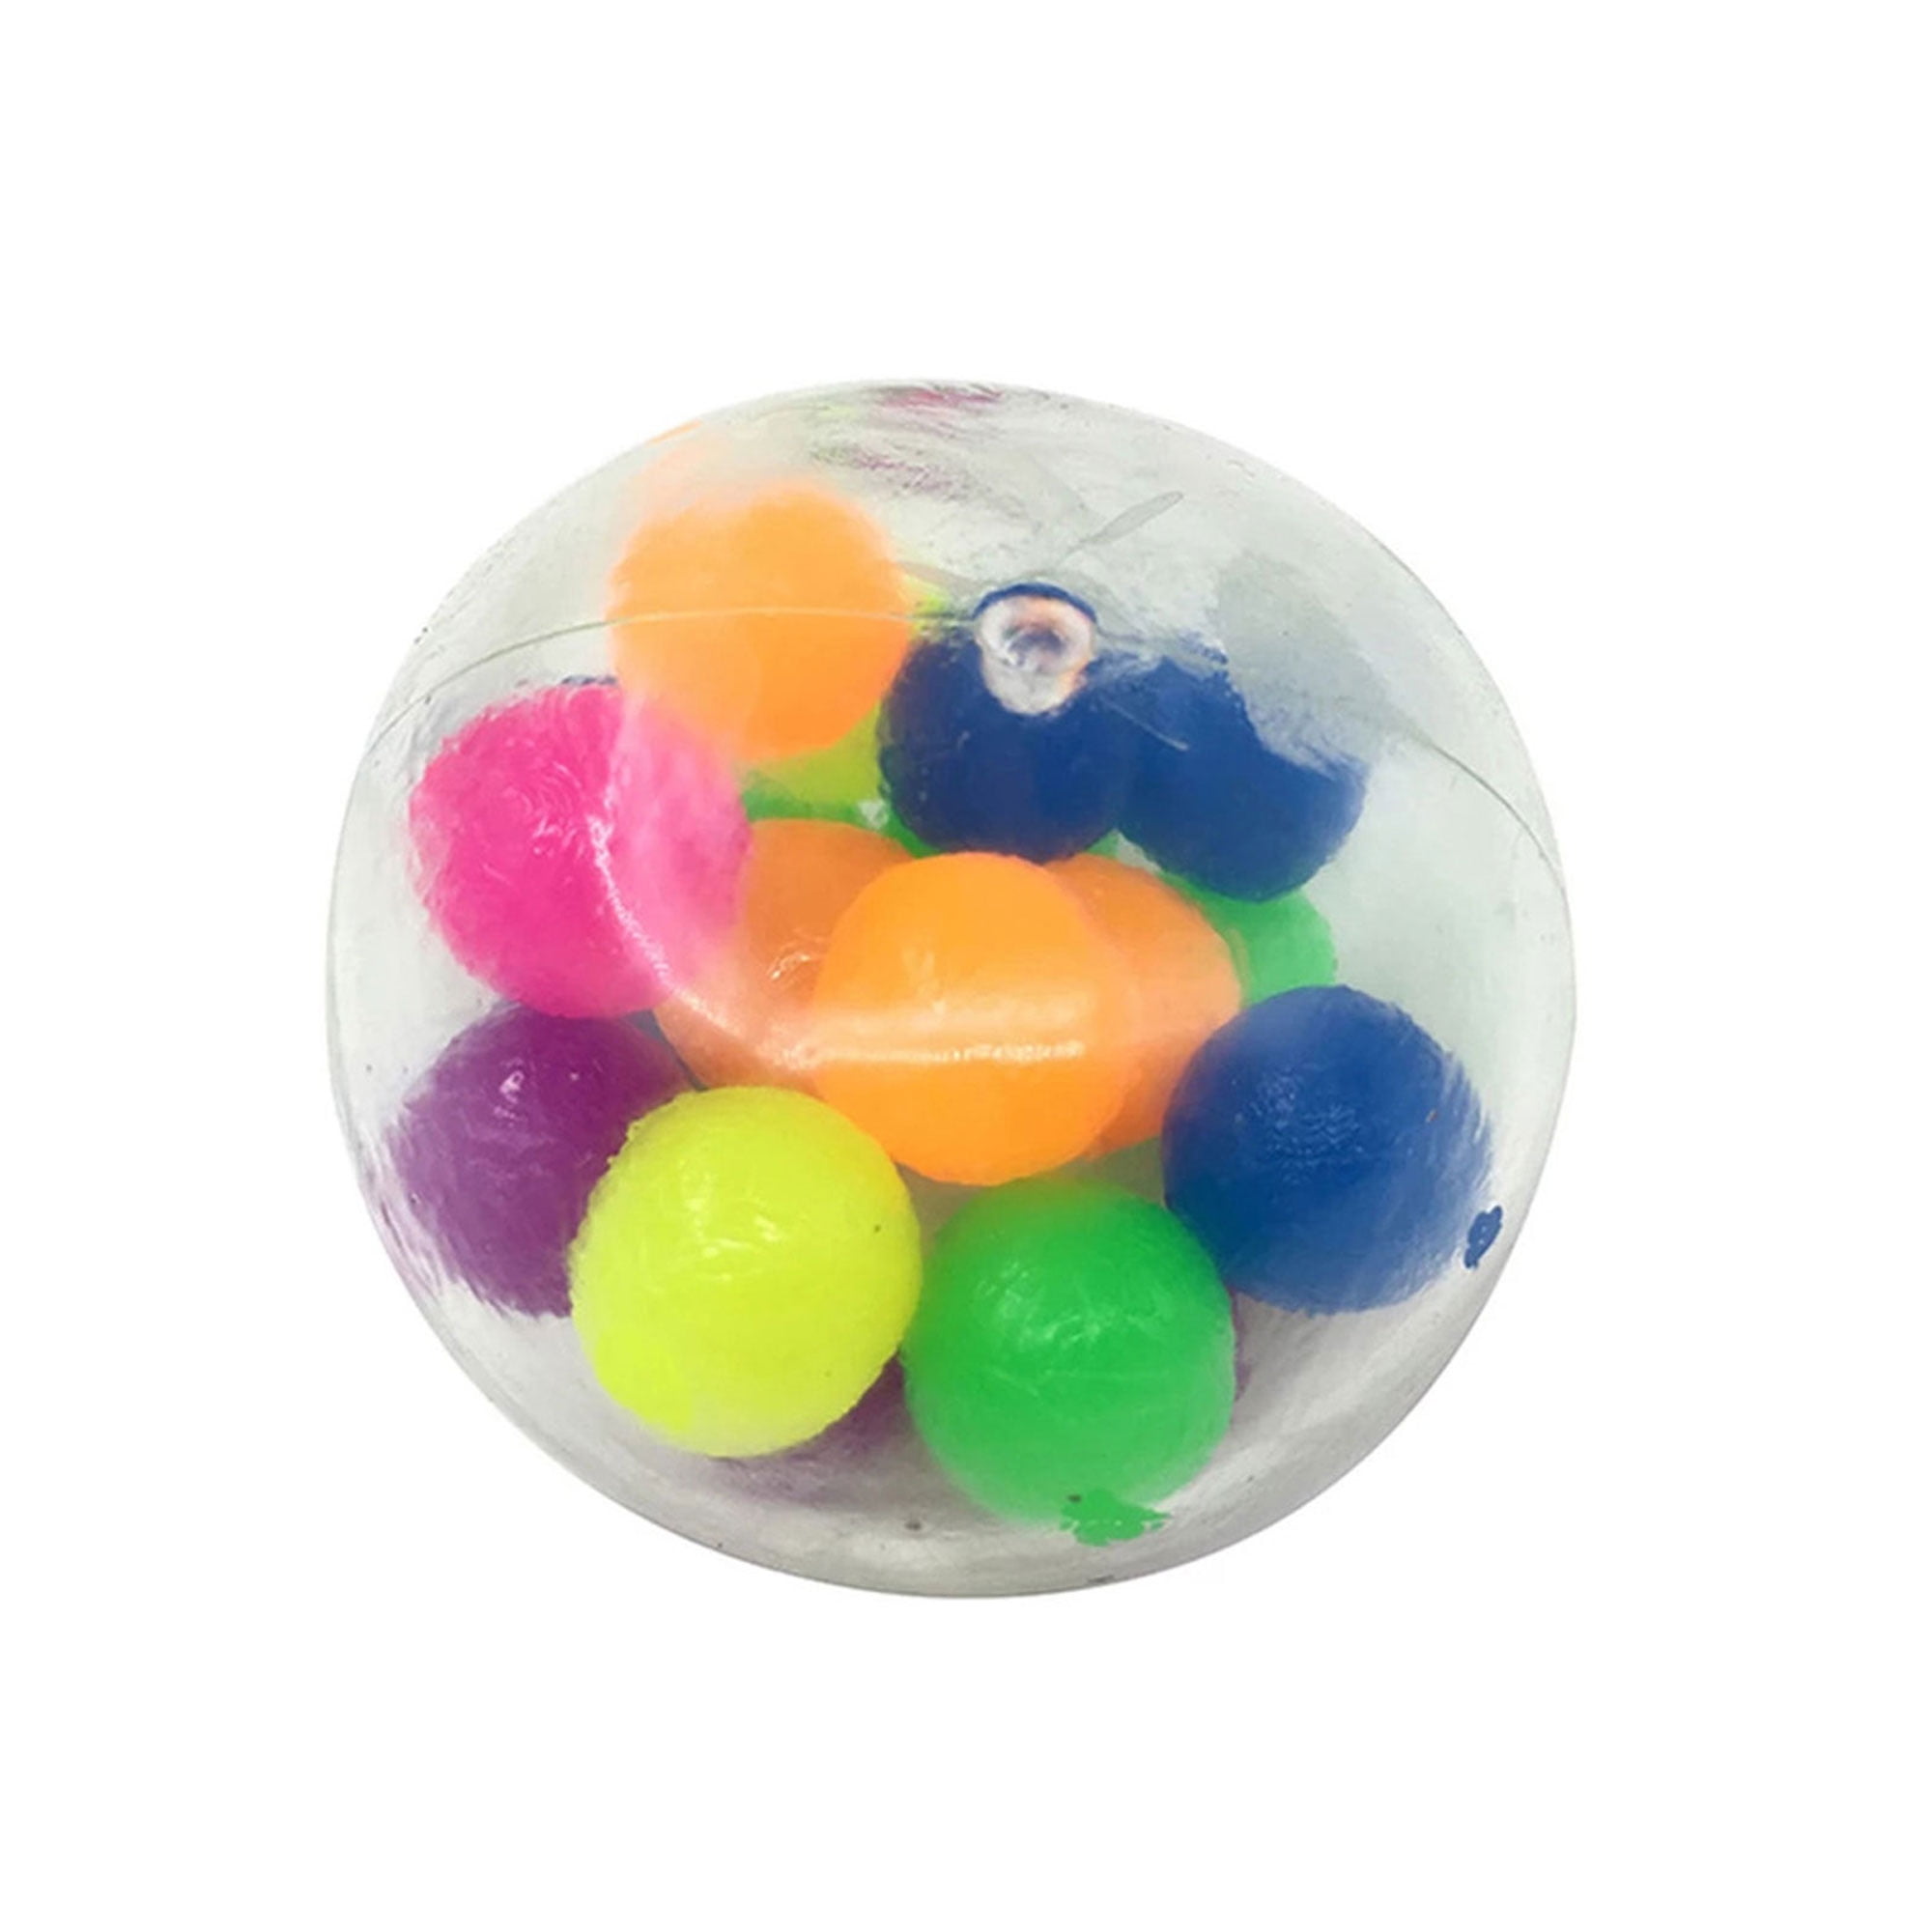 DNA Ball UK POSTED Jelly Bead Ball 1 x Multi Colour Stressball 